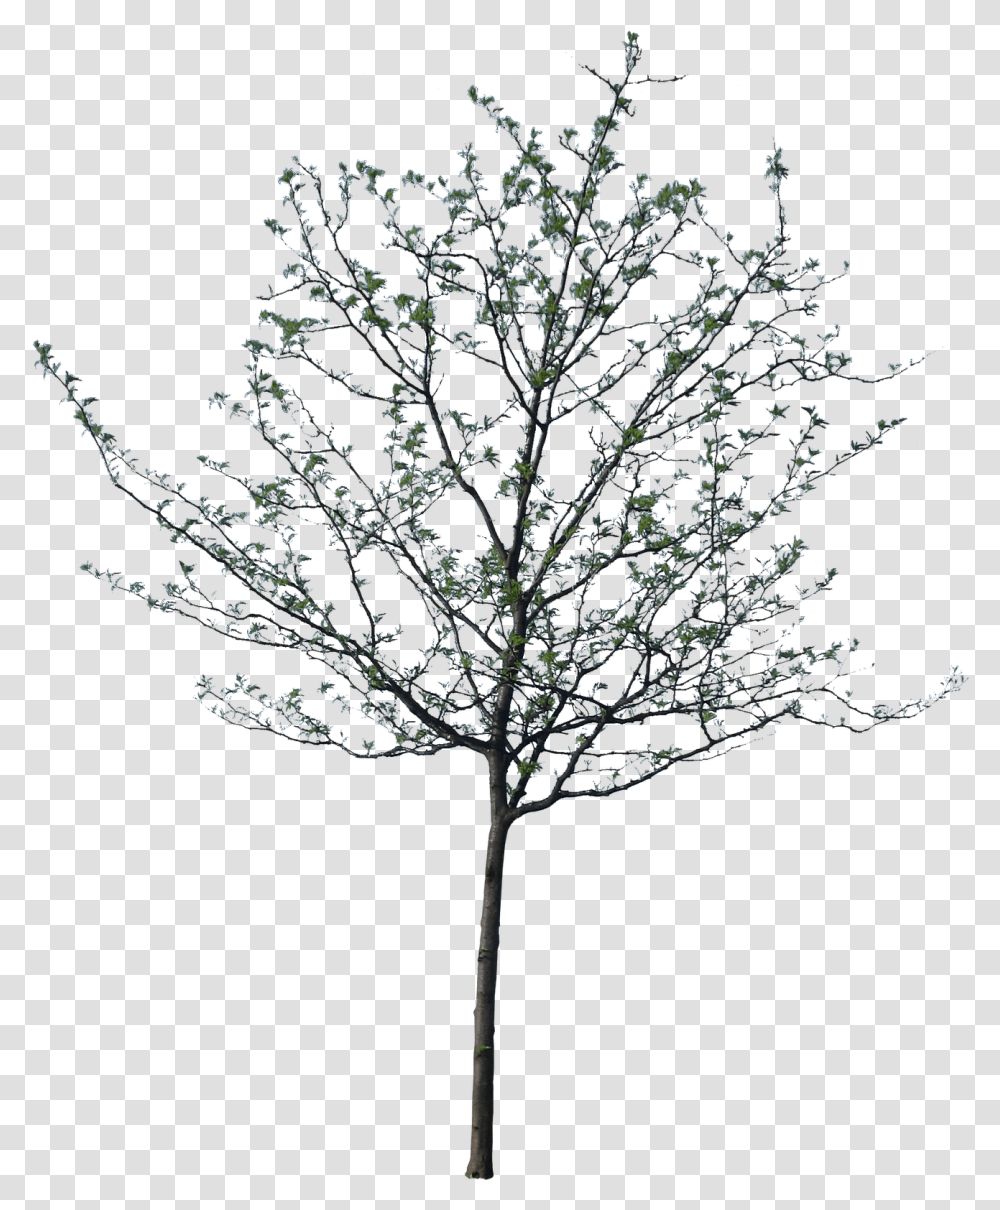 Springtime Tree Black And White & Free Architecture Vector Tree, Plant, Cross, Outdoors, Nature Transparent Png